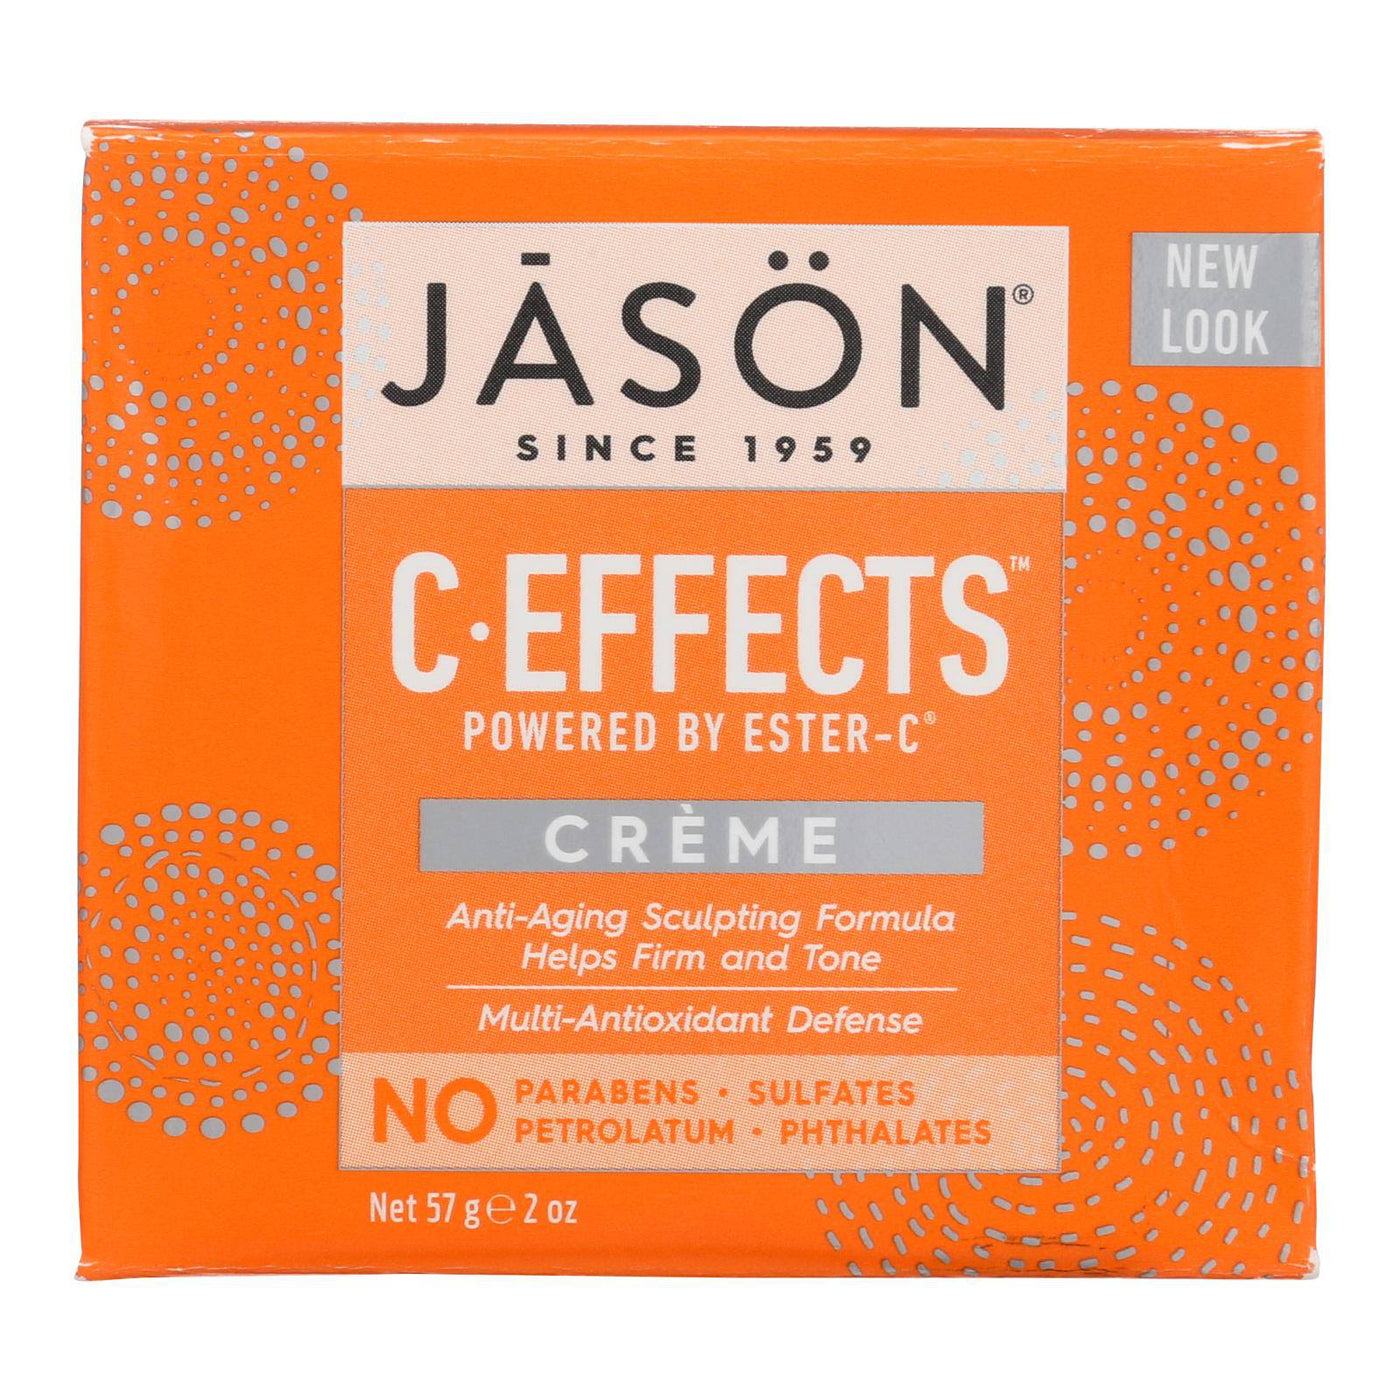 Buy Jason Pure Natural Creme C Effects Powered By Ester-c - 2 Oz  at OnlyNaturals.us